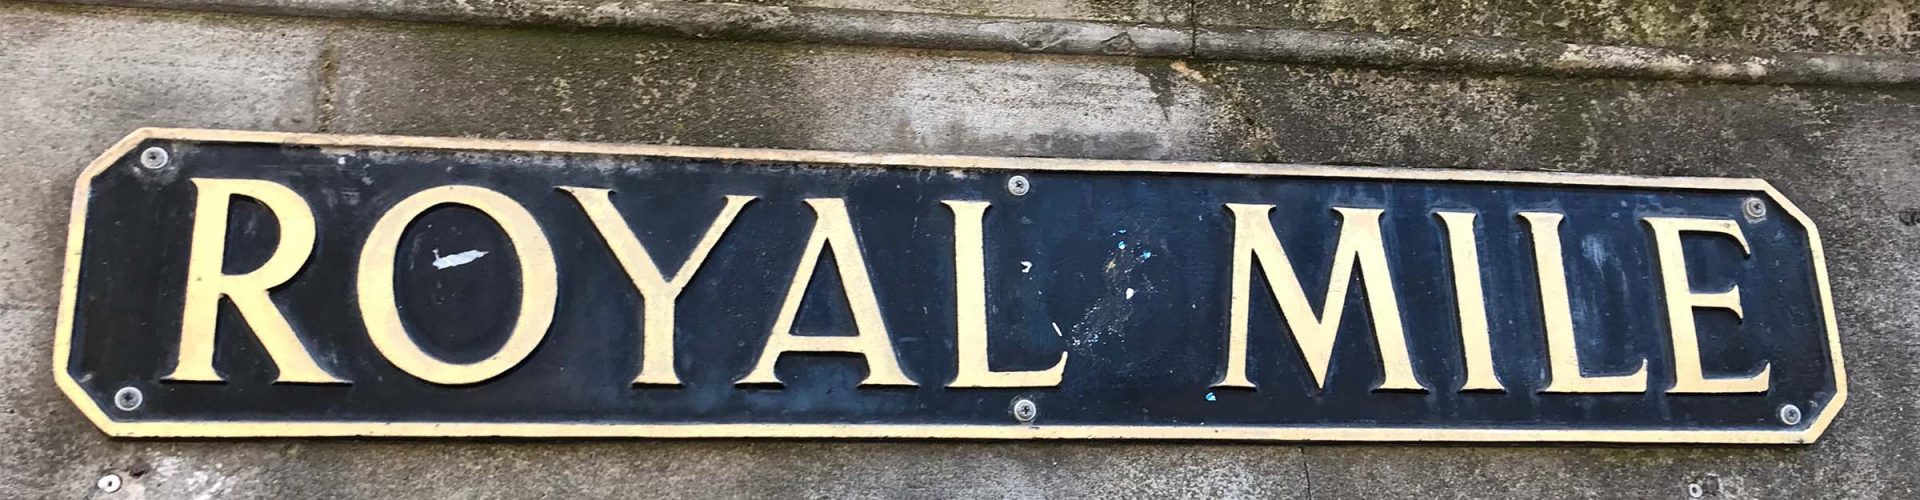 A street sign for the Royal Mile in Edinburgh